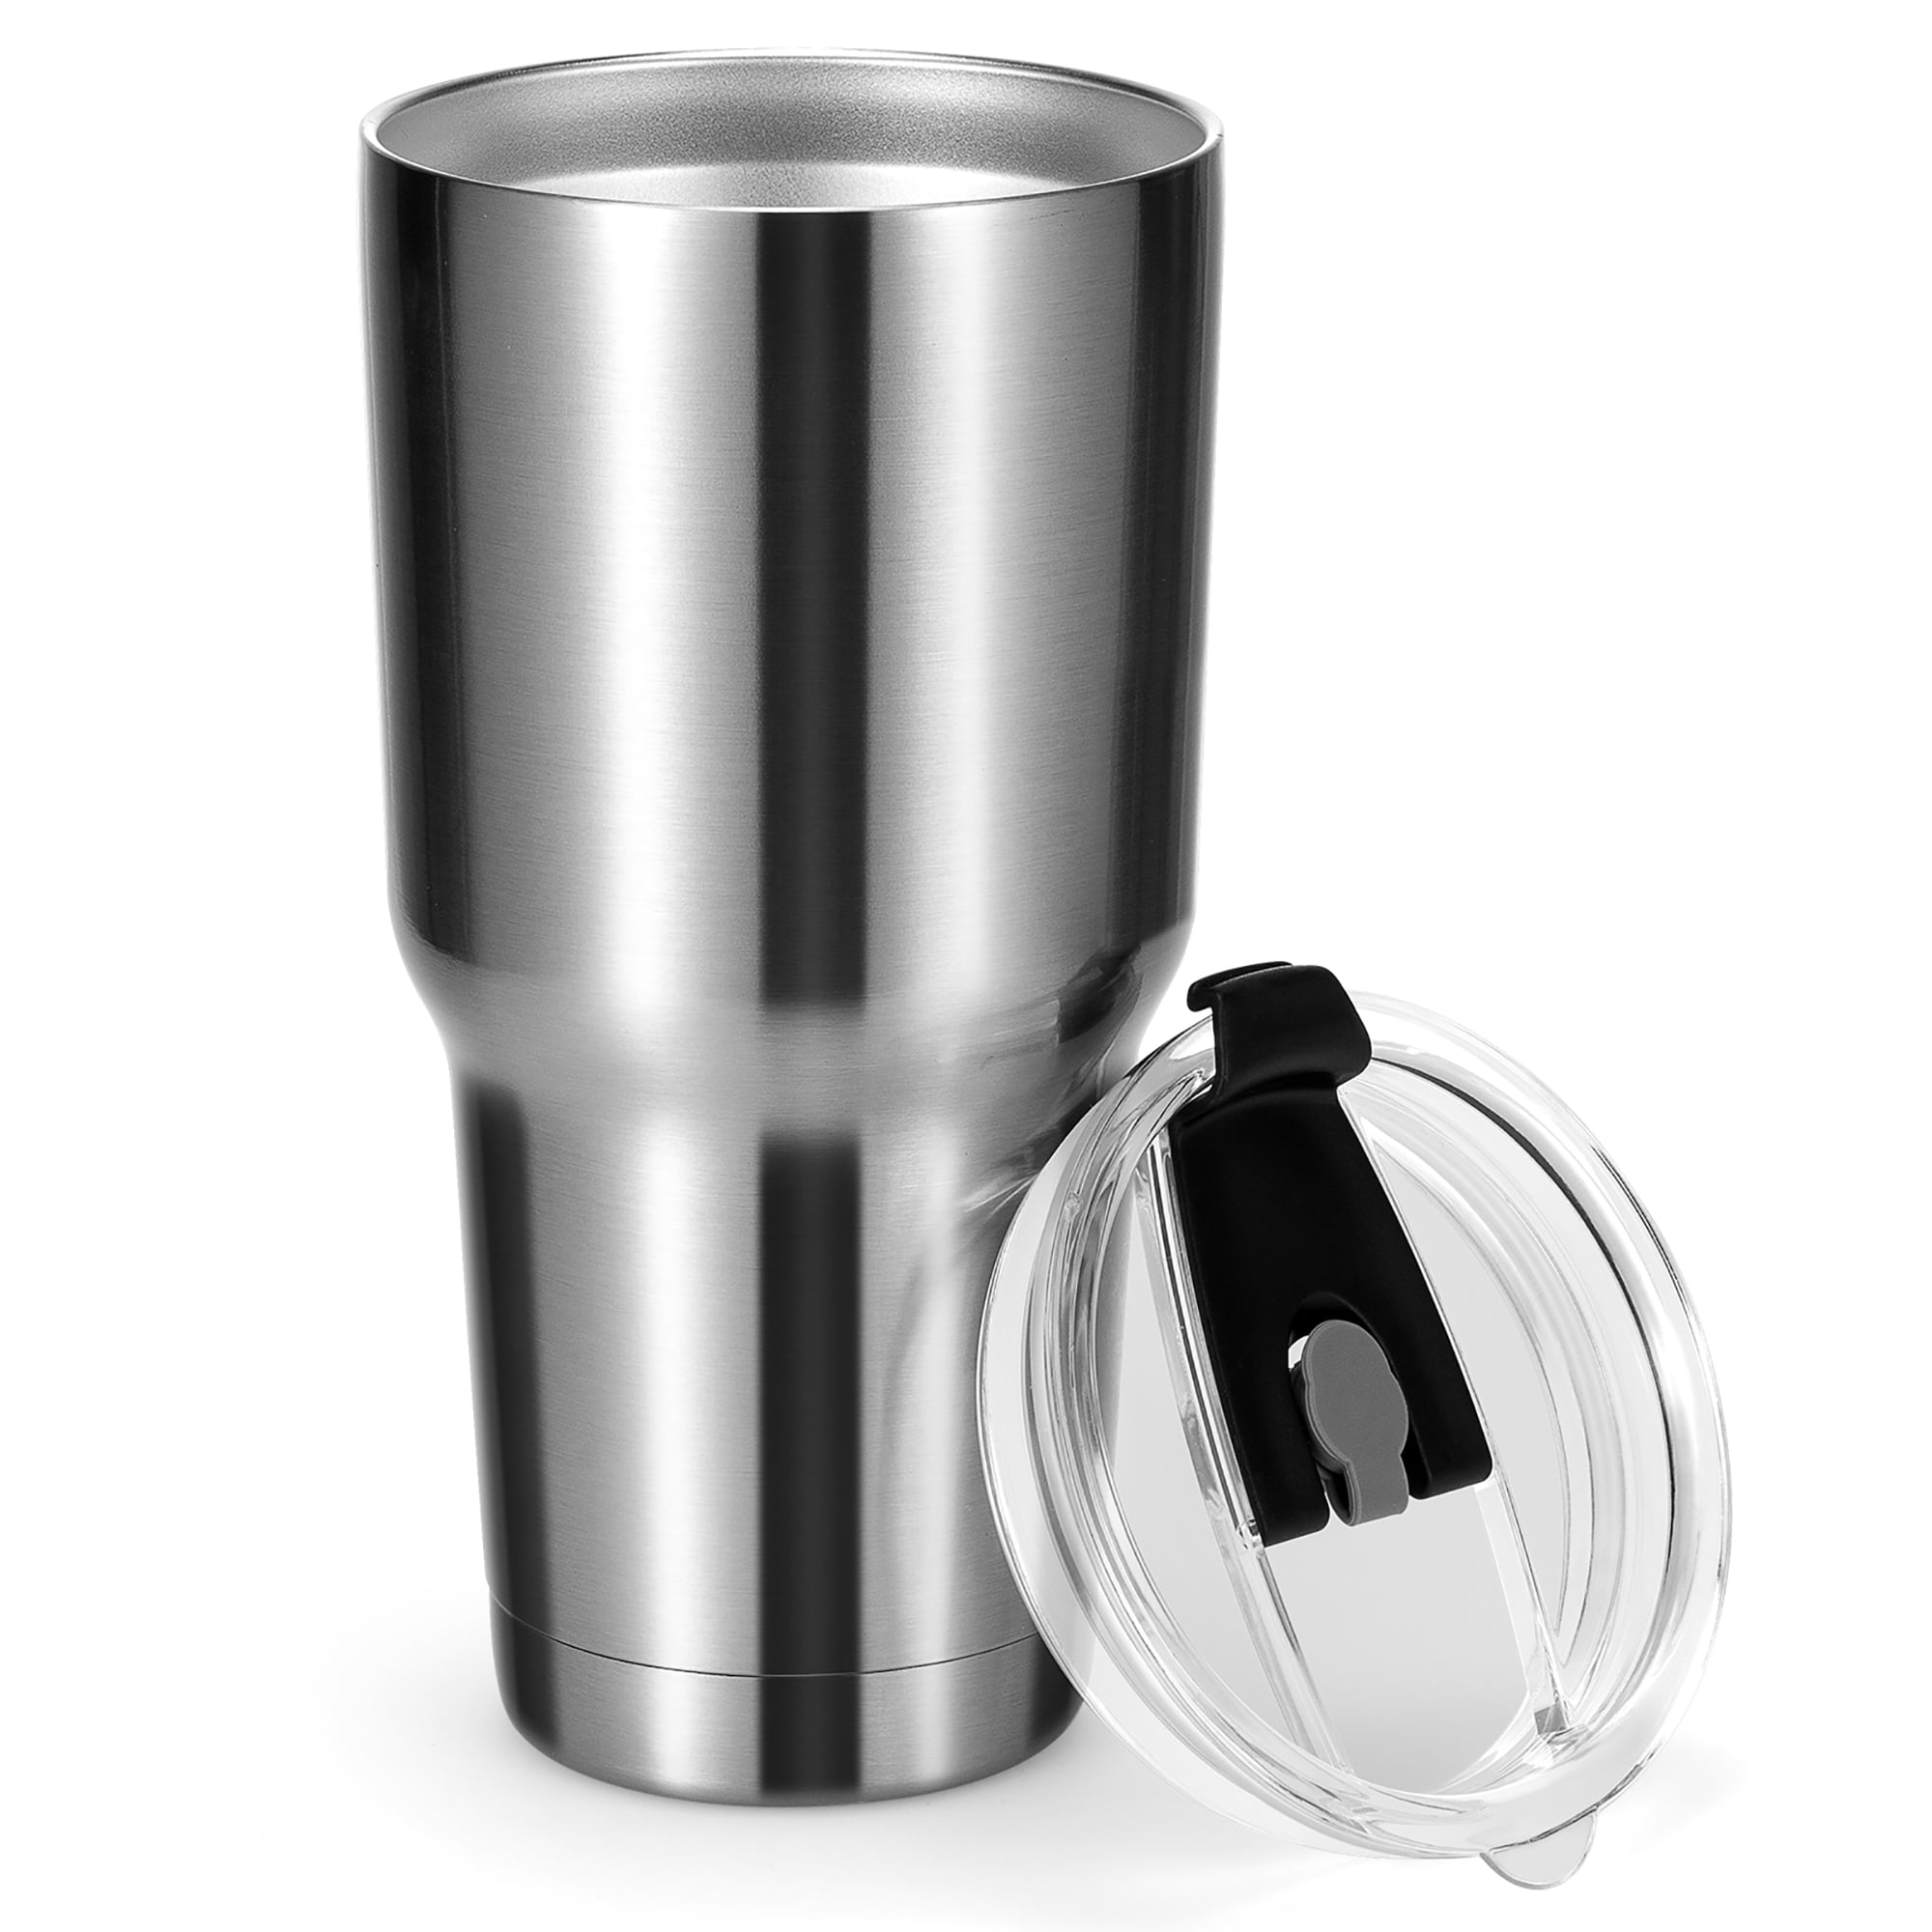 XccMe 30oz Sublimation Tumblers Bulk,4PACK Stainless Steel  Coffee Mugs,Double Wall Vacuum Insulated with Shrink Wrap Films and Splash  Proof Lids,Travel Cups for DIY Gift,Coffee,Beverage White: Tumblers & Water  Glasses